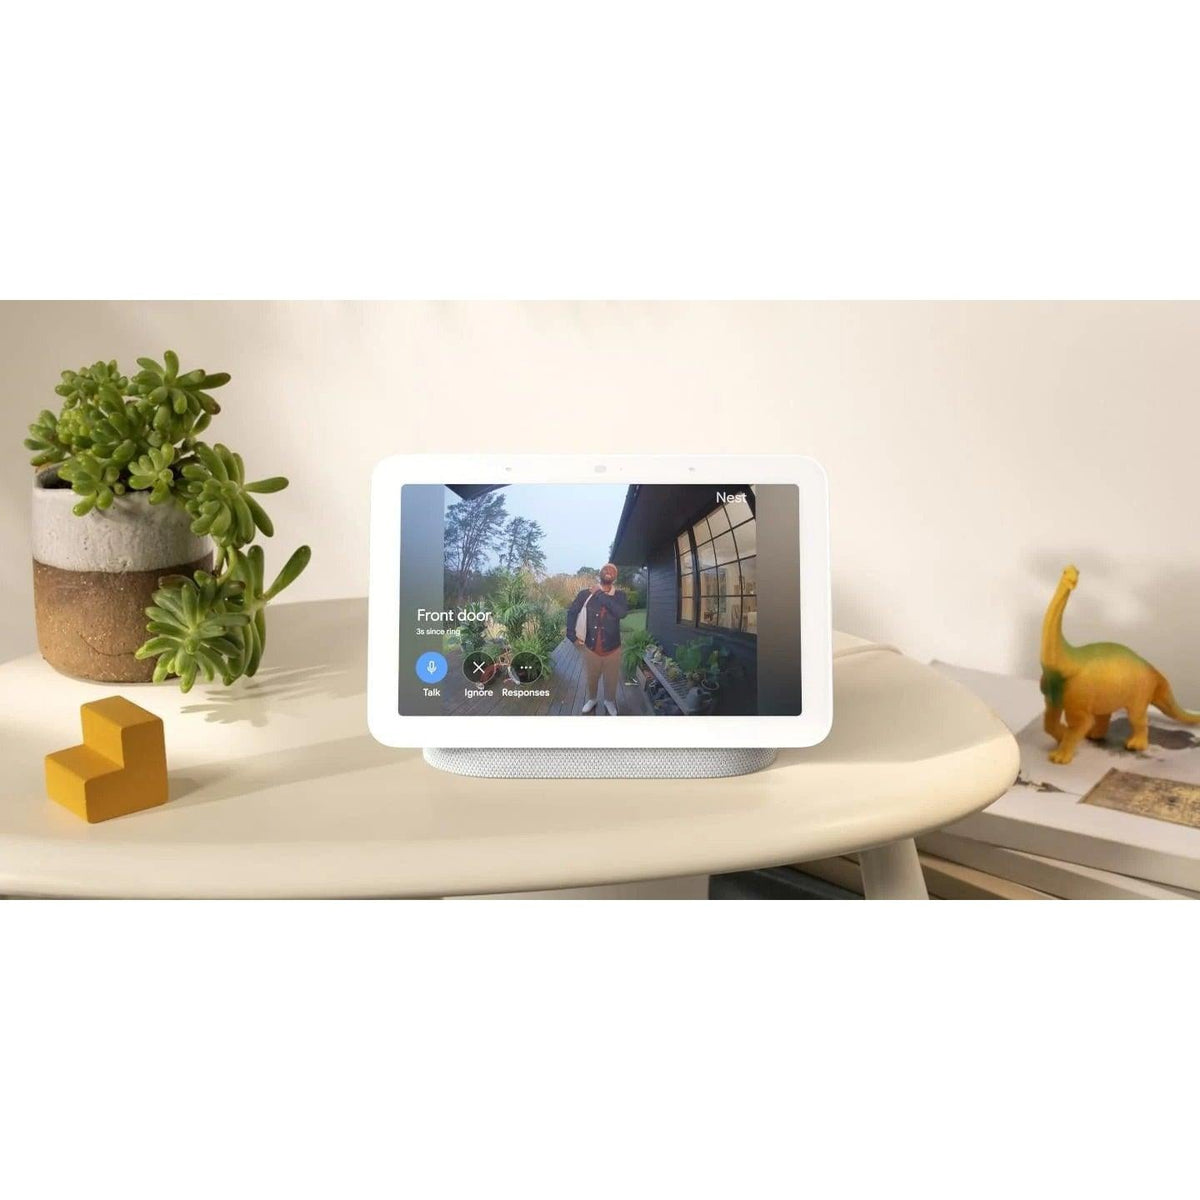 Google Nest Hub 2nd Gen with Google Assistant - Chalk | GA01331-GB from DID Electrical - guaranteed Irish, guaranteed quality service. (6977694564540)